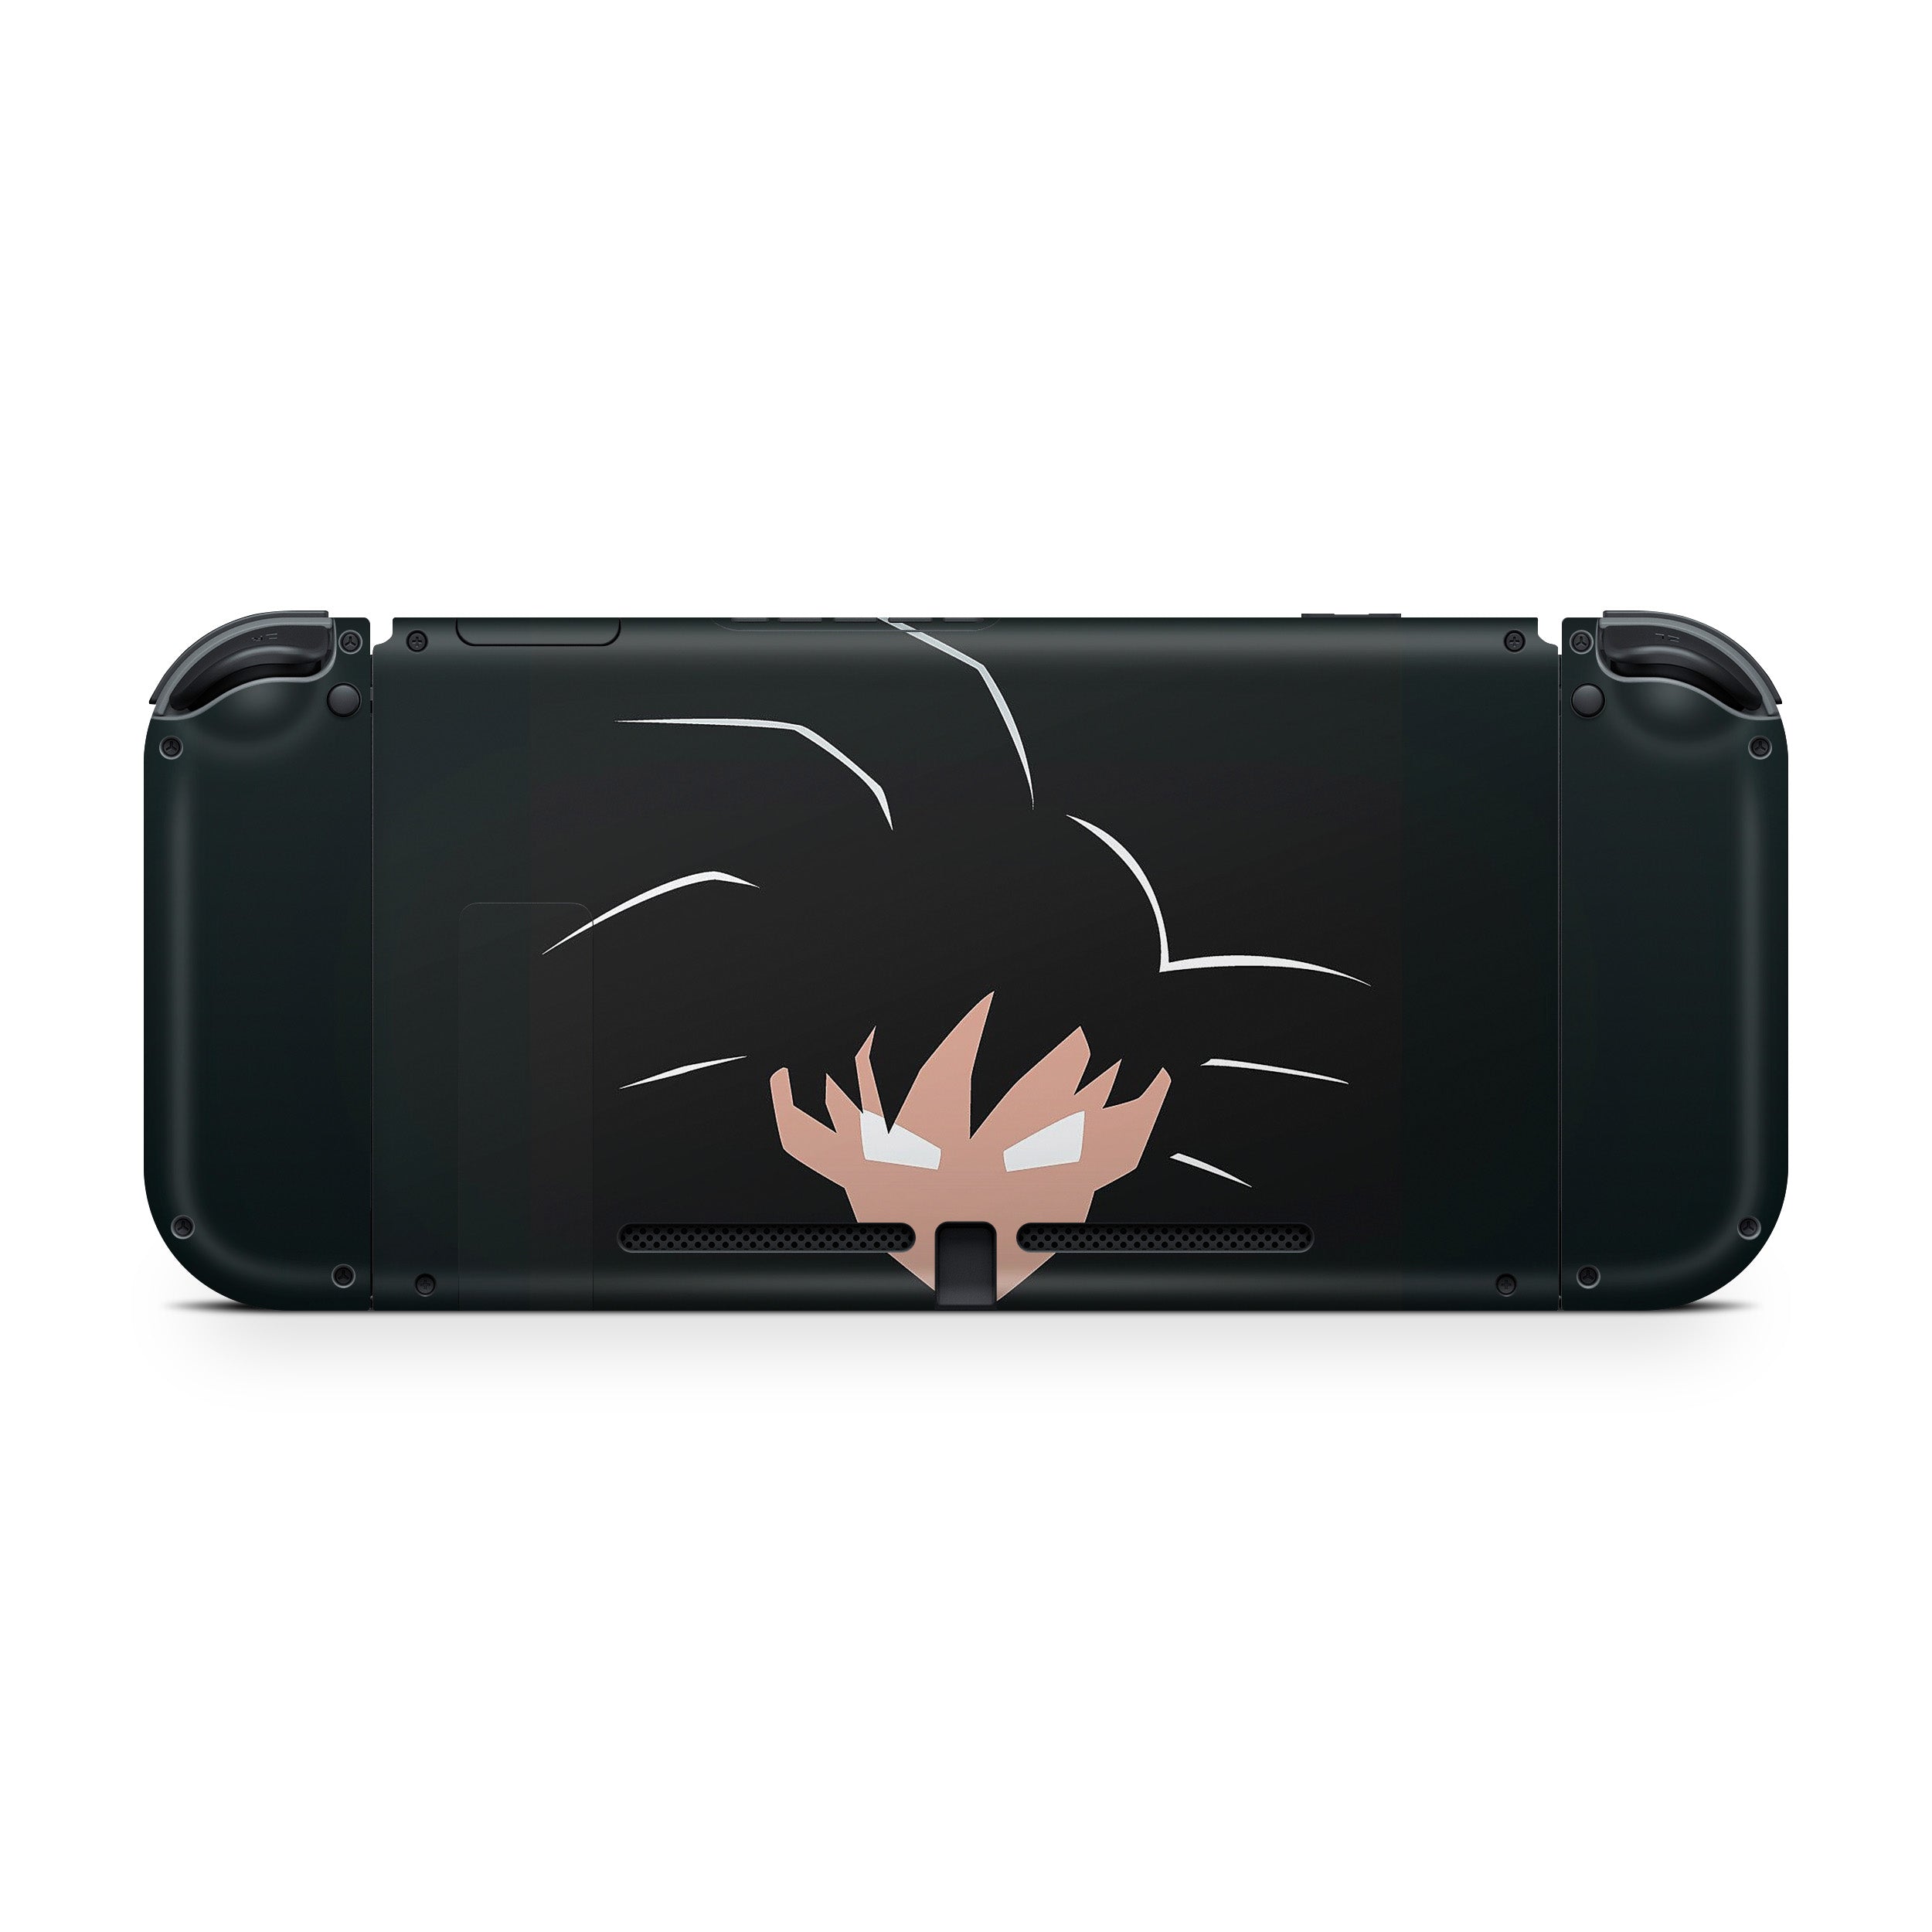 A video game skin featuring a Dragon Ball Z Black Goku design for the Nintendo Switch.